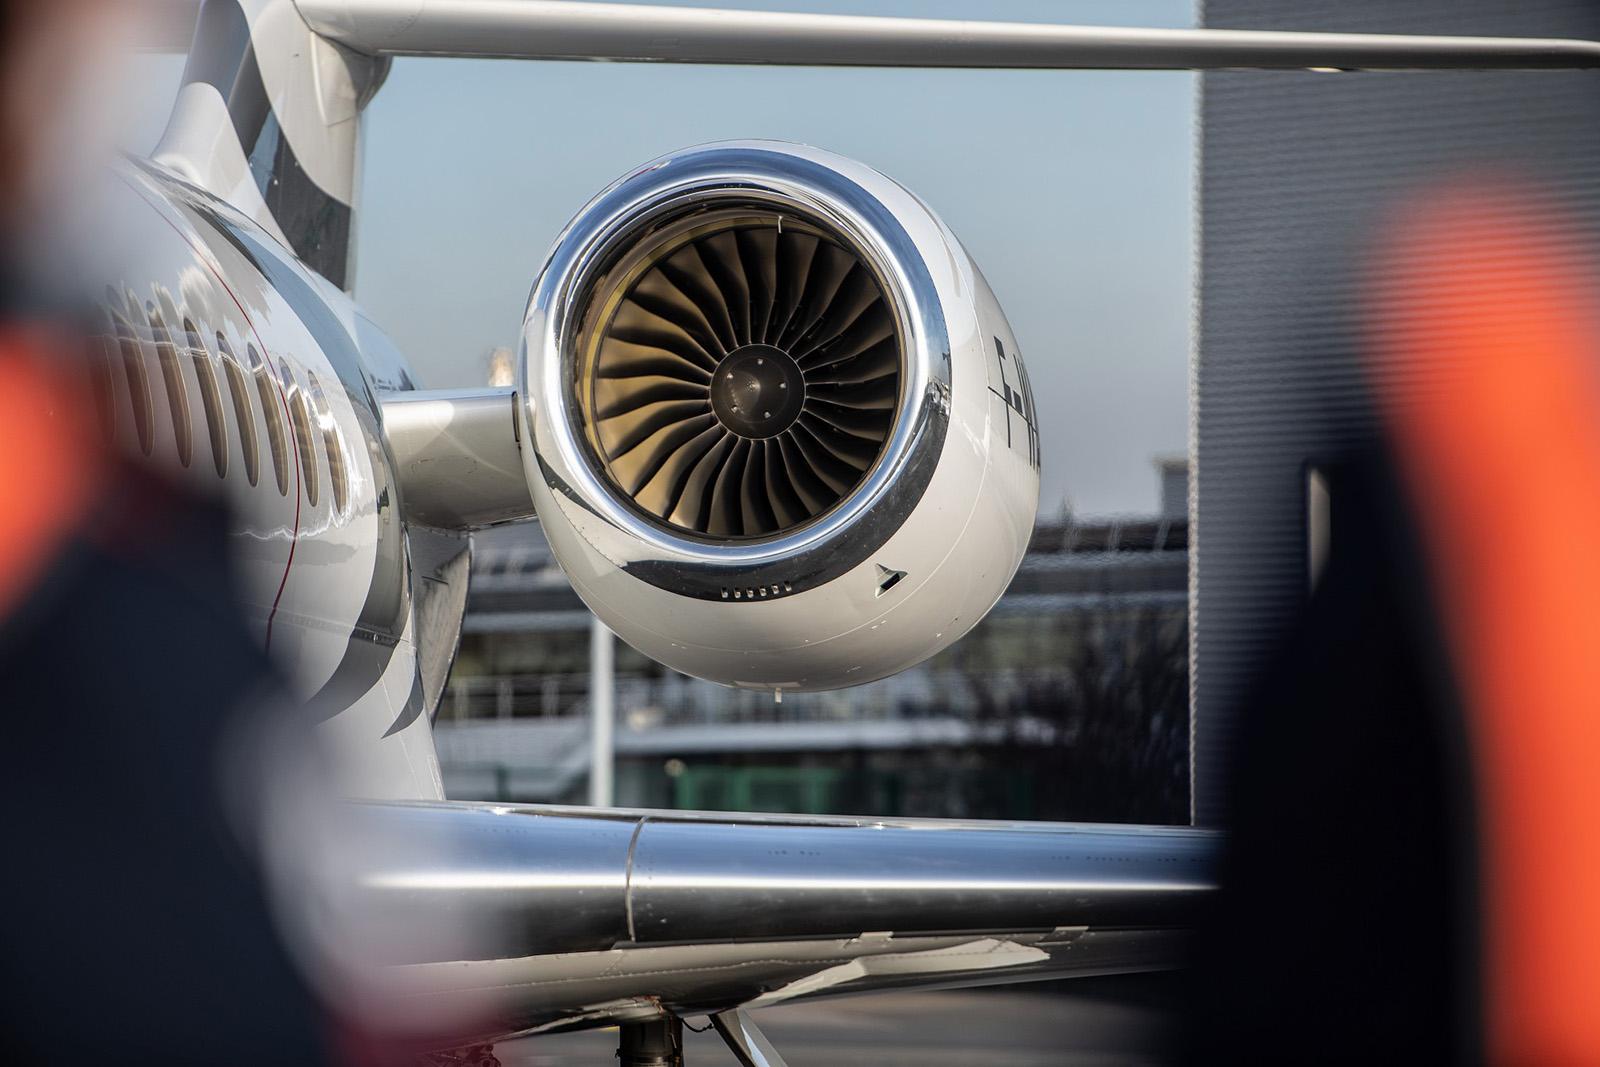 PW812D engine powering the Dassault Falcon 6X. 